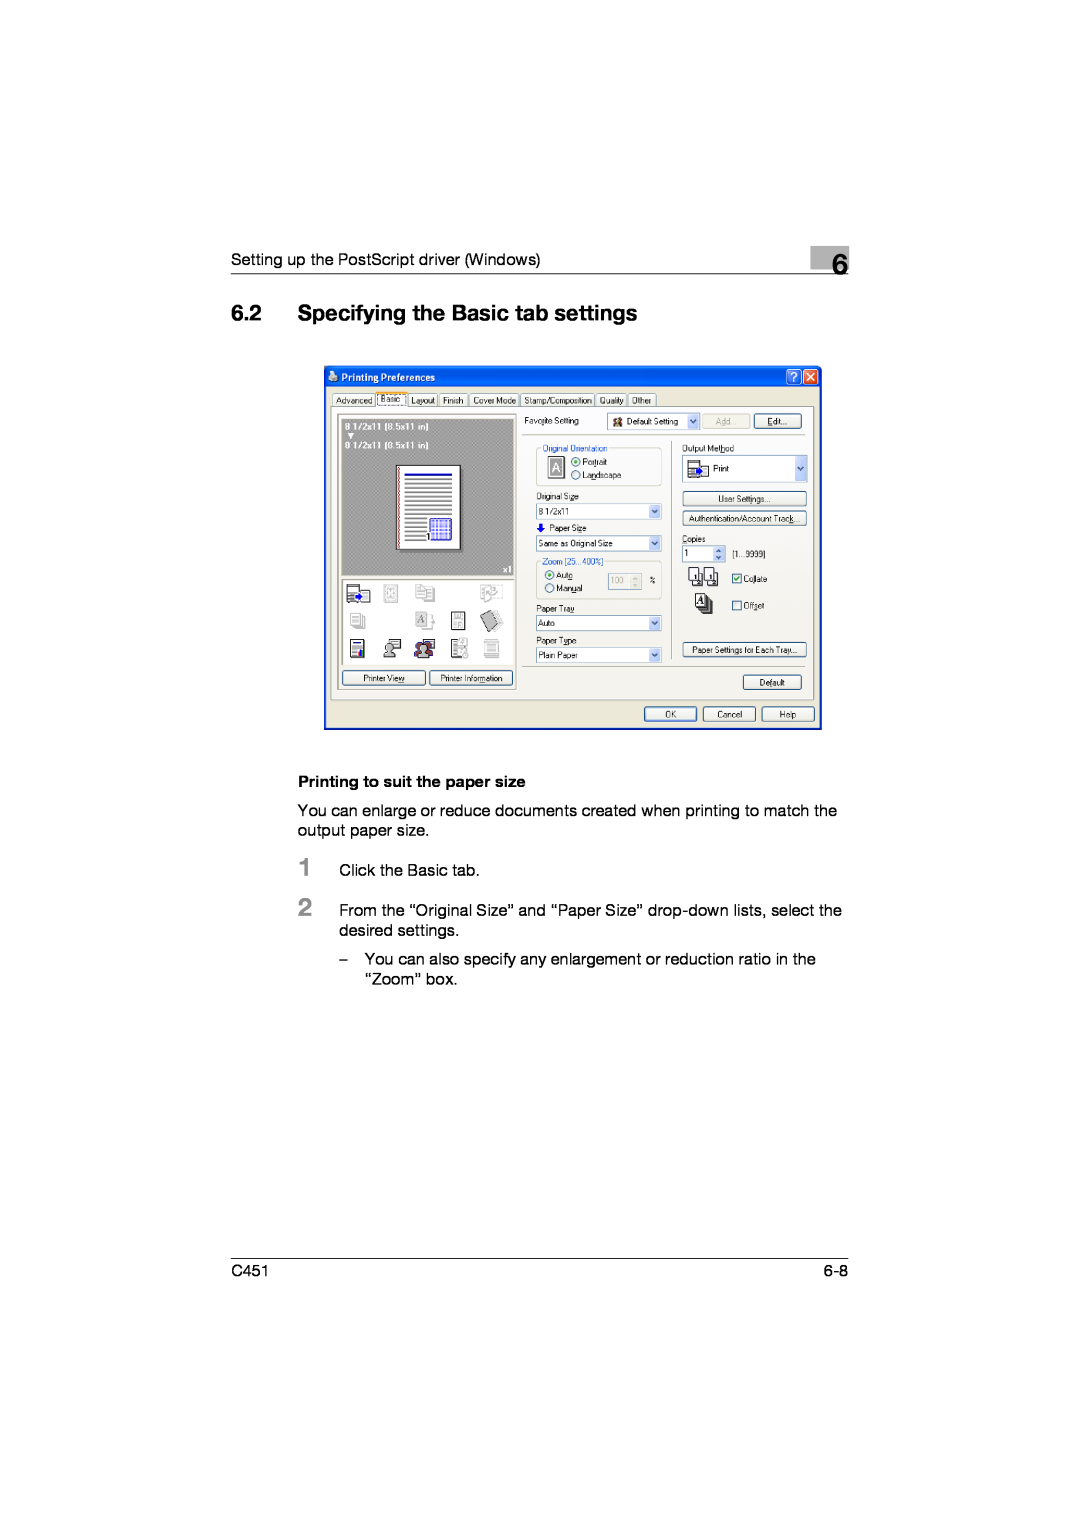 Konica Minolta C451 manual 6.2Specifying the Basic tab settings, Printing to suit the paper size 